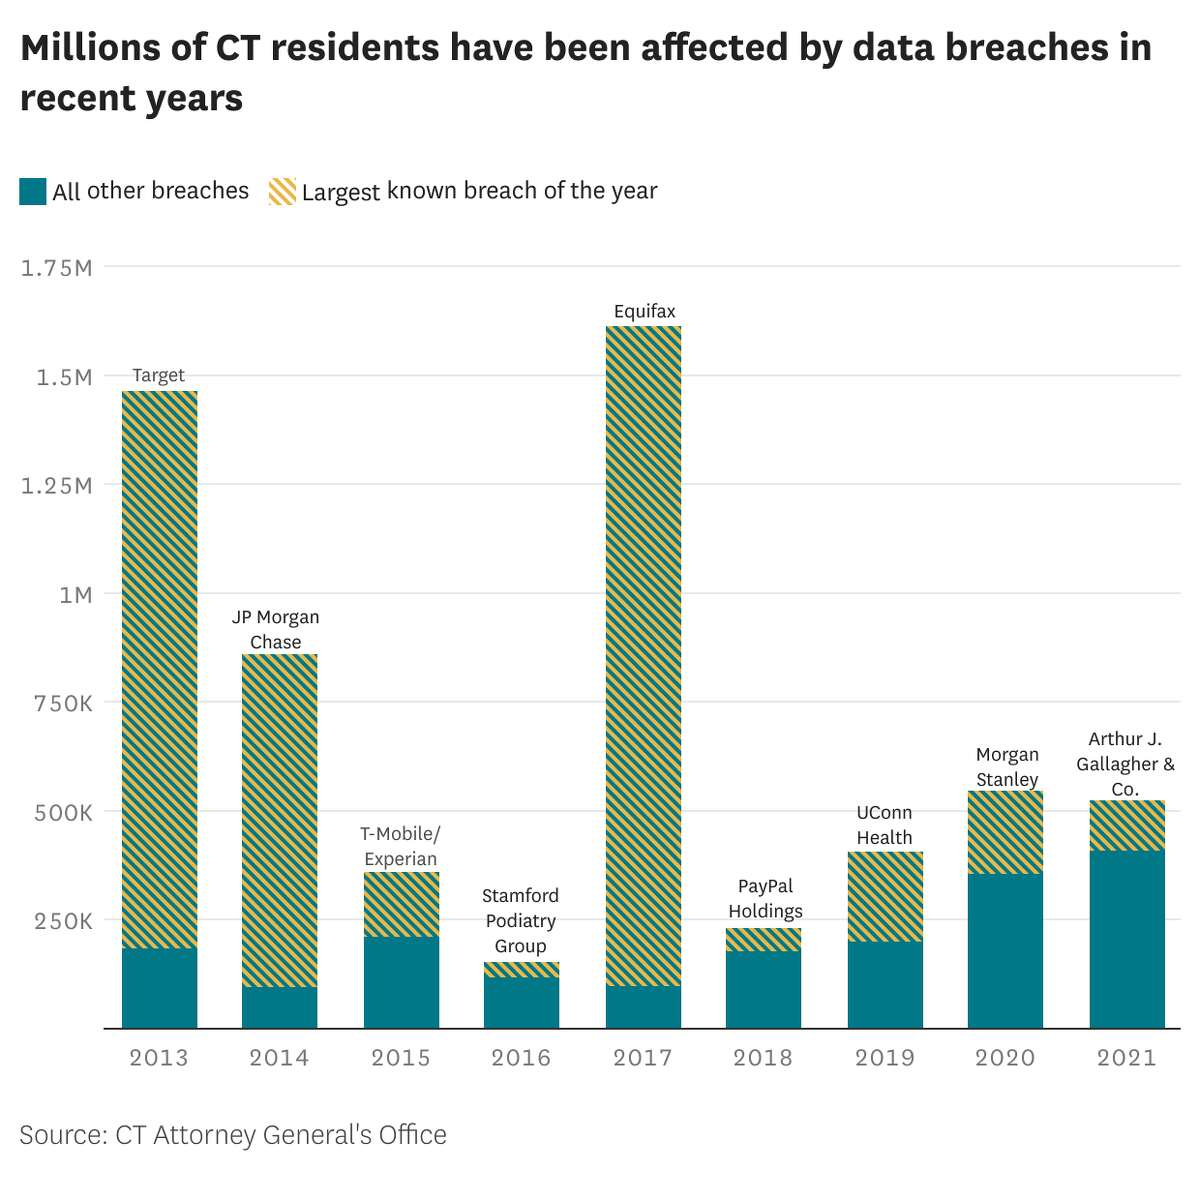 Information about the number of consumers affected was missing for about two dozen organizations per year. Counts can be duplicated when two organizations reported the same data breach. 